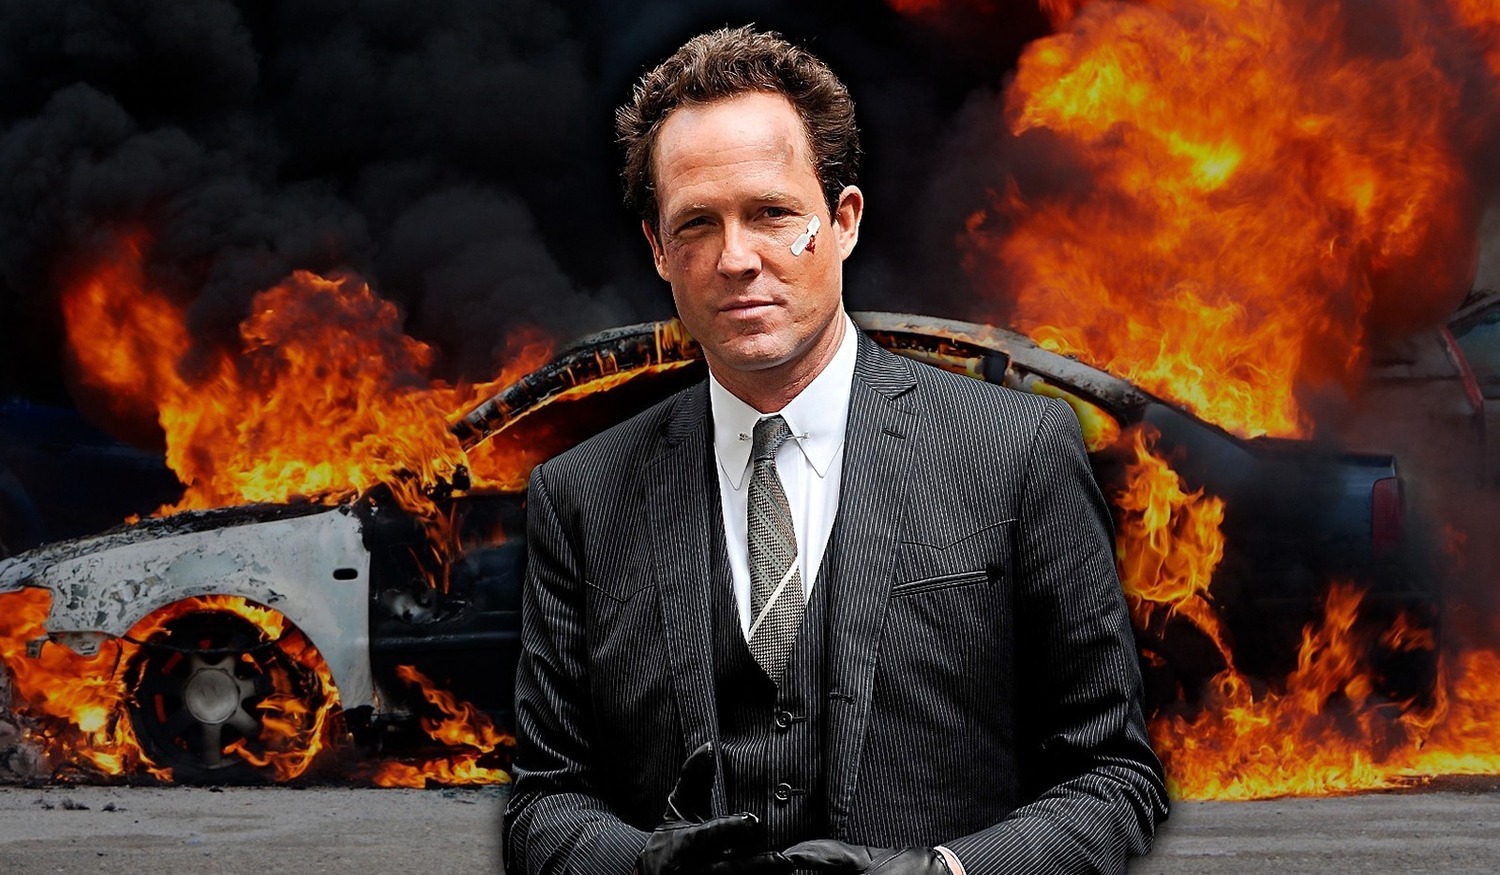 The "mayhem guy" stands in front of a burning car